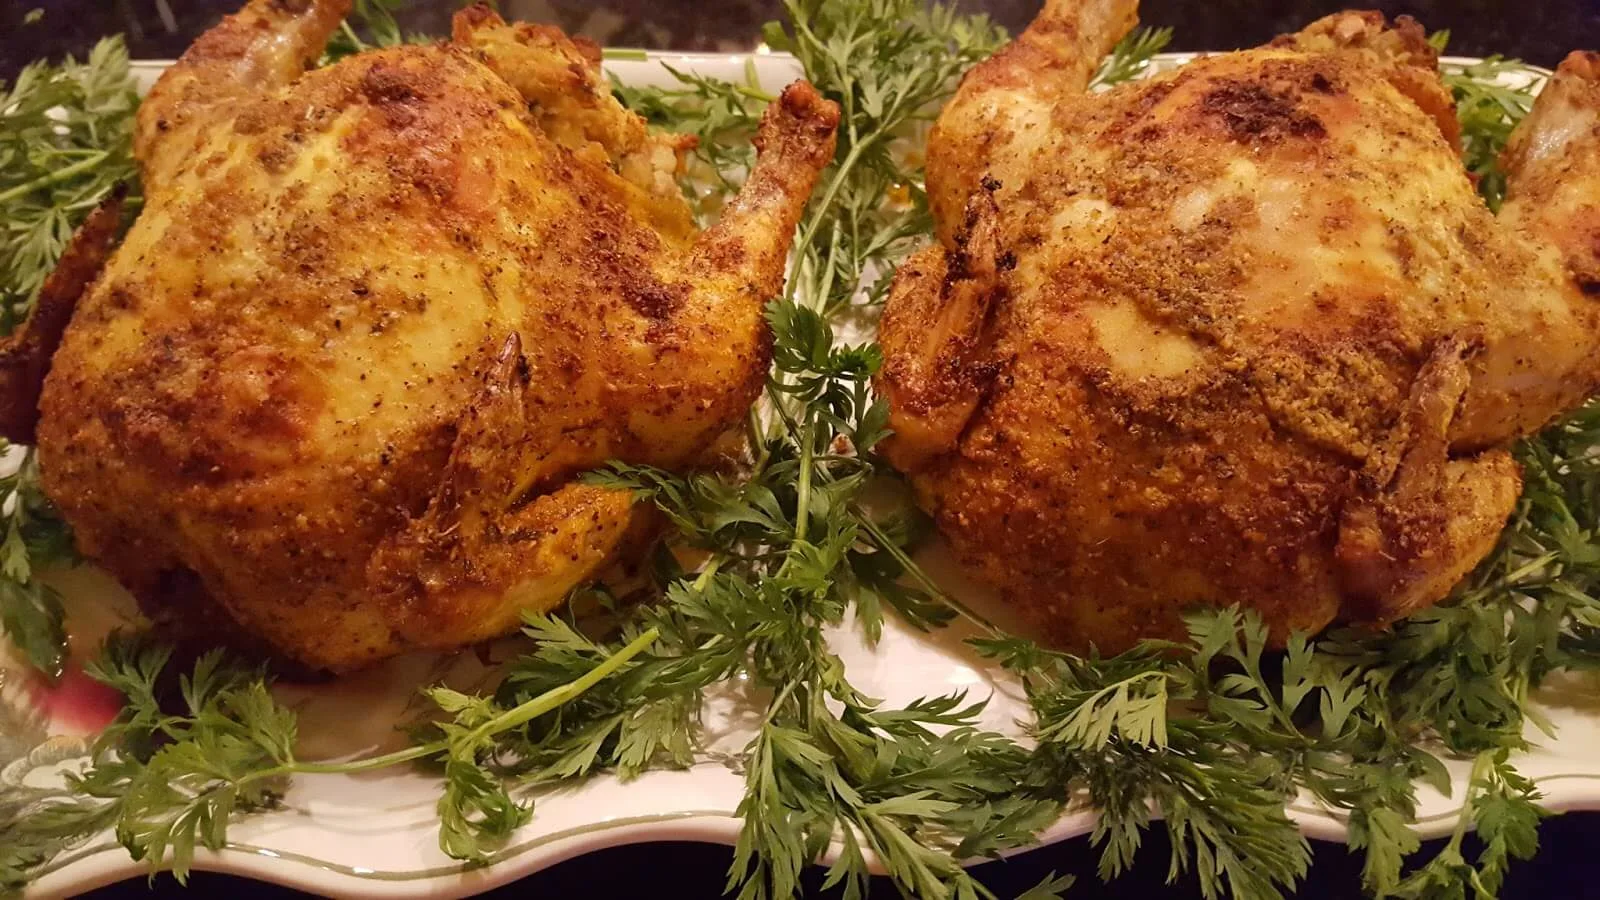 Roasted Game Hens with stuffing